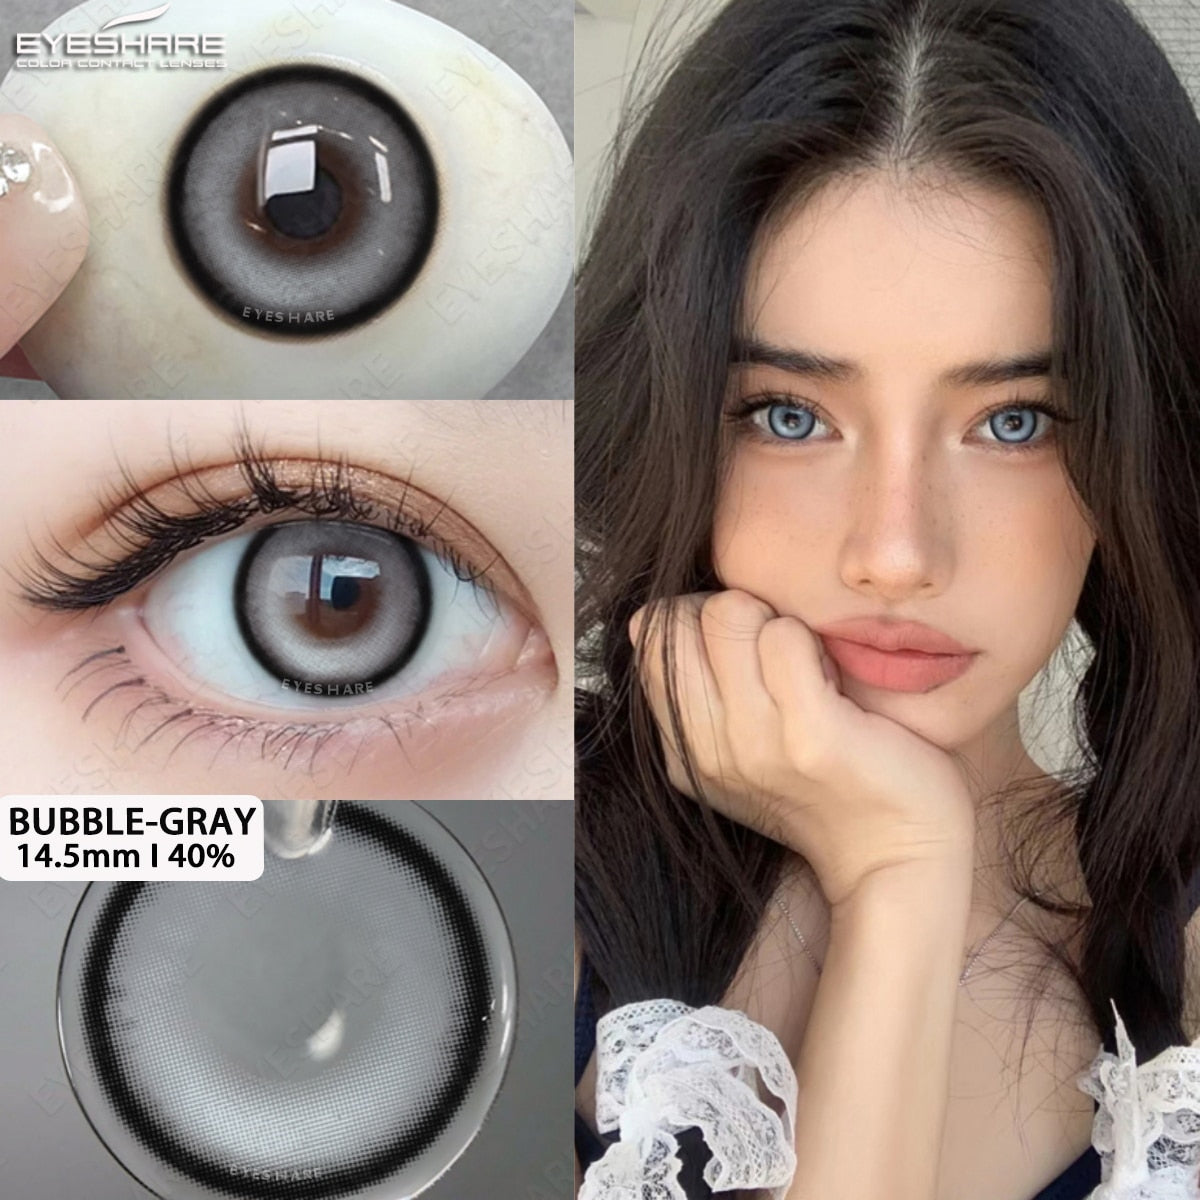 1Pair New Color Contact Lenses for Eyes Natural Brown Eyes Contacts Lenses Yearly Fashion Blue Eyes Lens Colored Lens